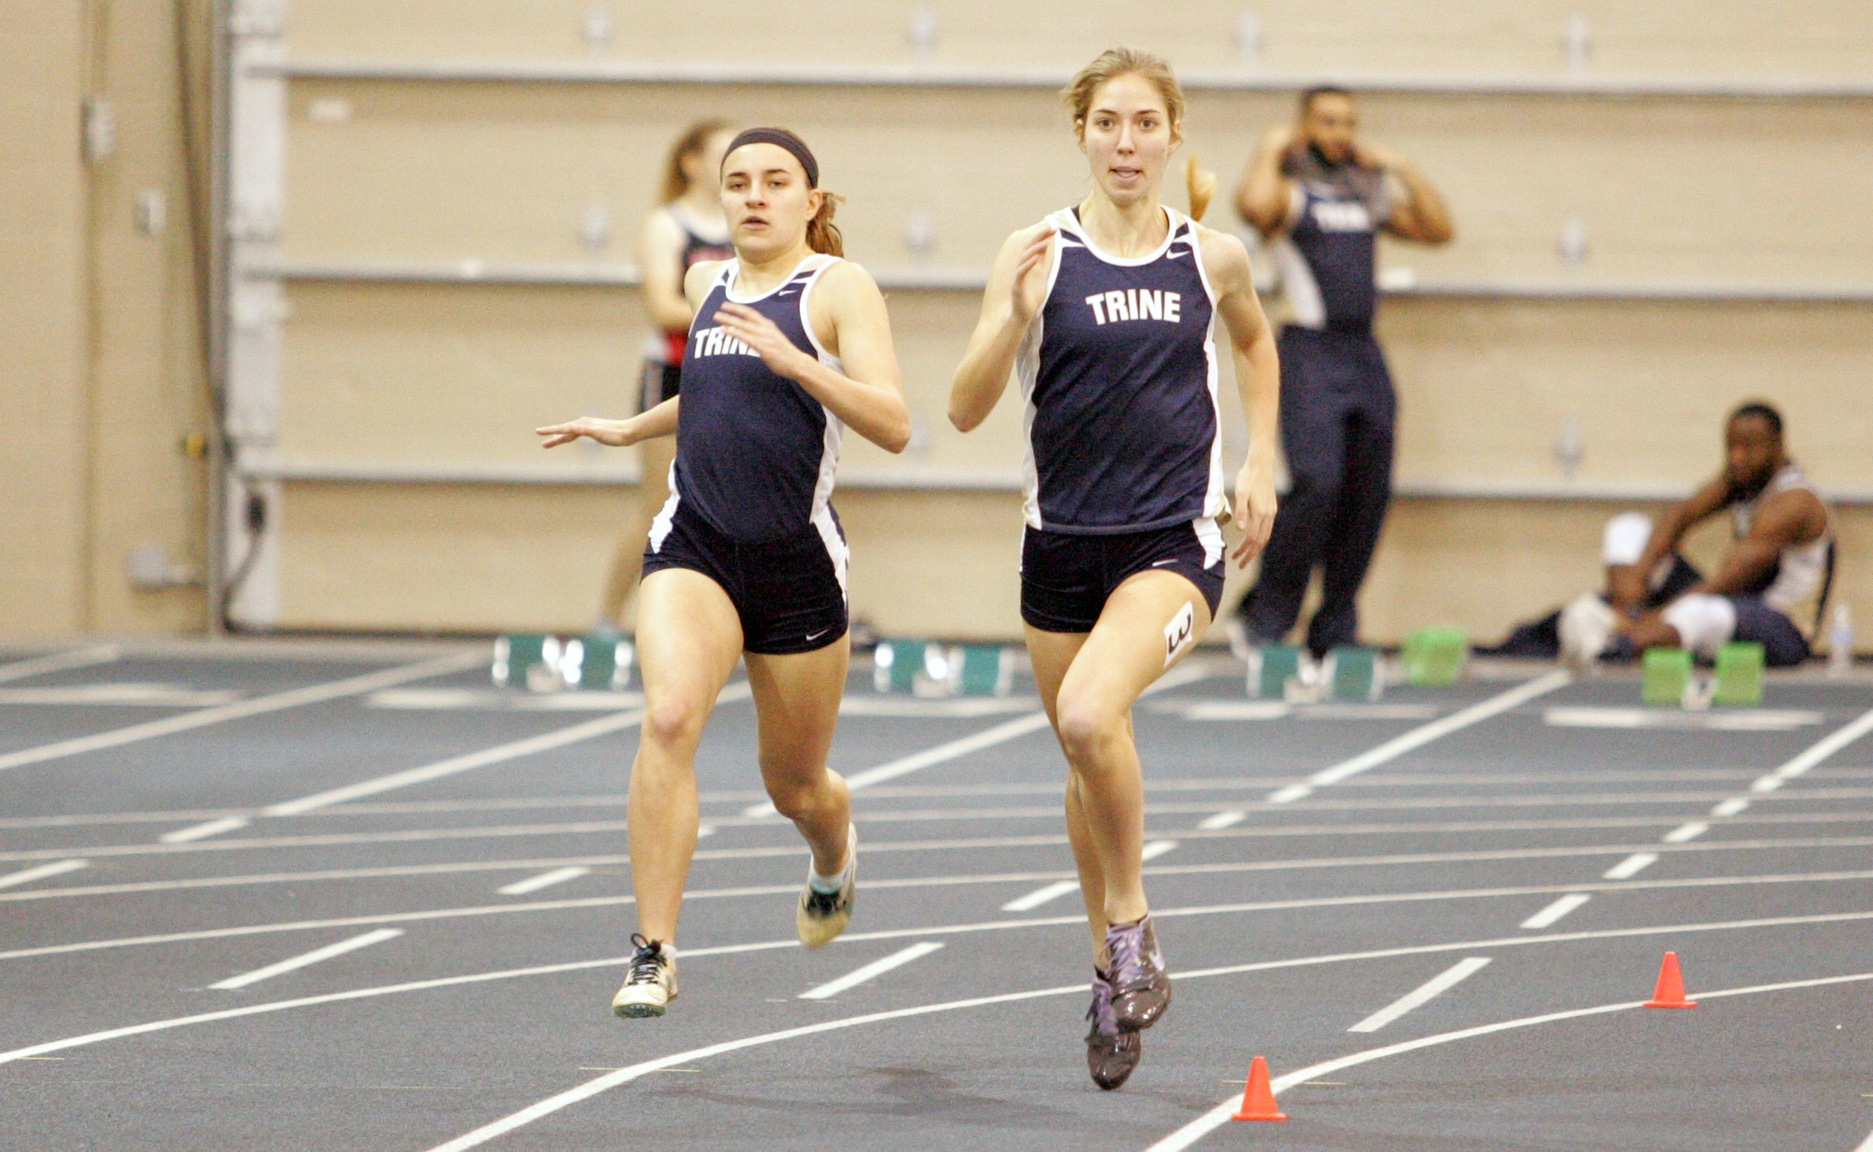 Women's Track and Field Team Earns First Regional Ranking